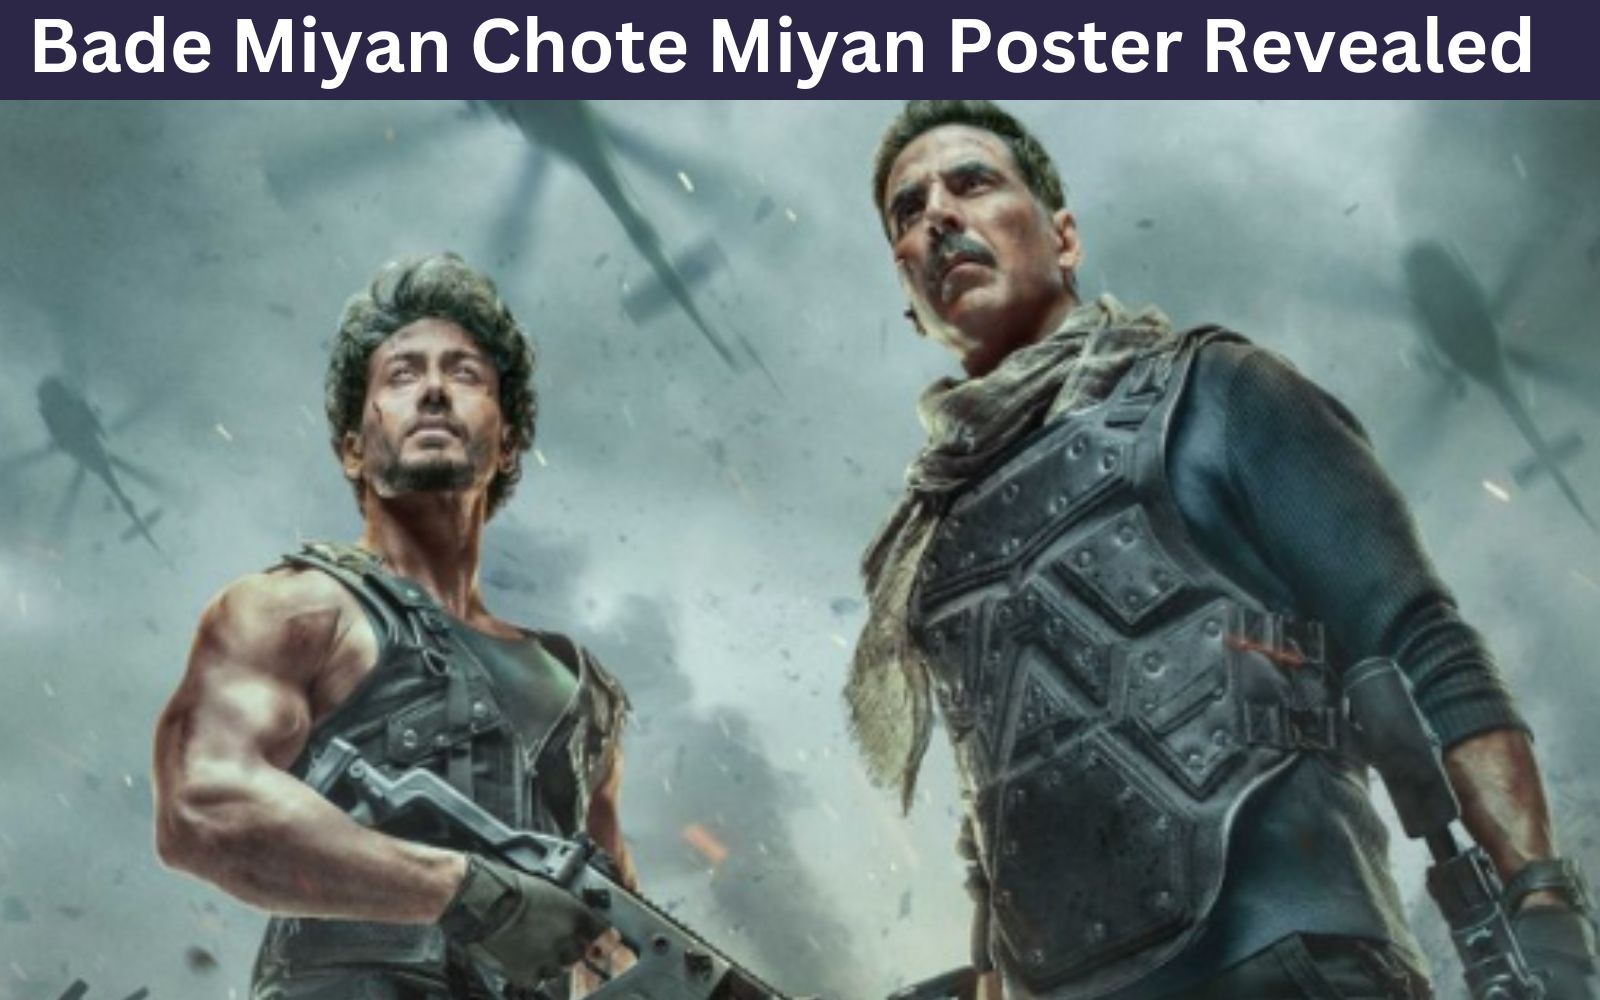 Bade Miyan Chote Miyan Poster Revealed: Fans Lose It Over Mind-Blowing First Look